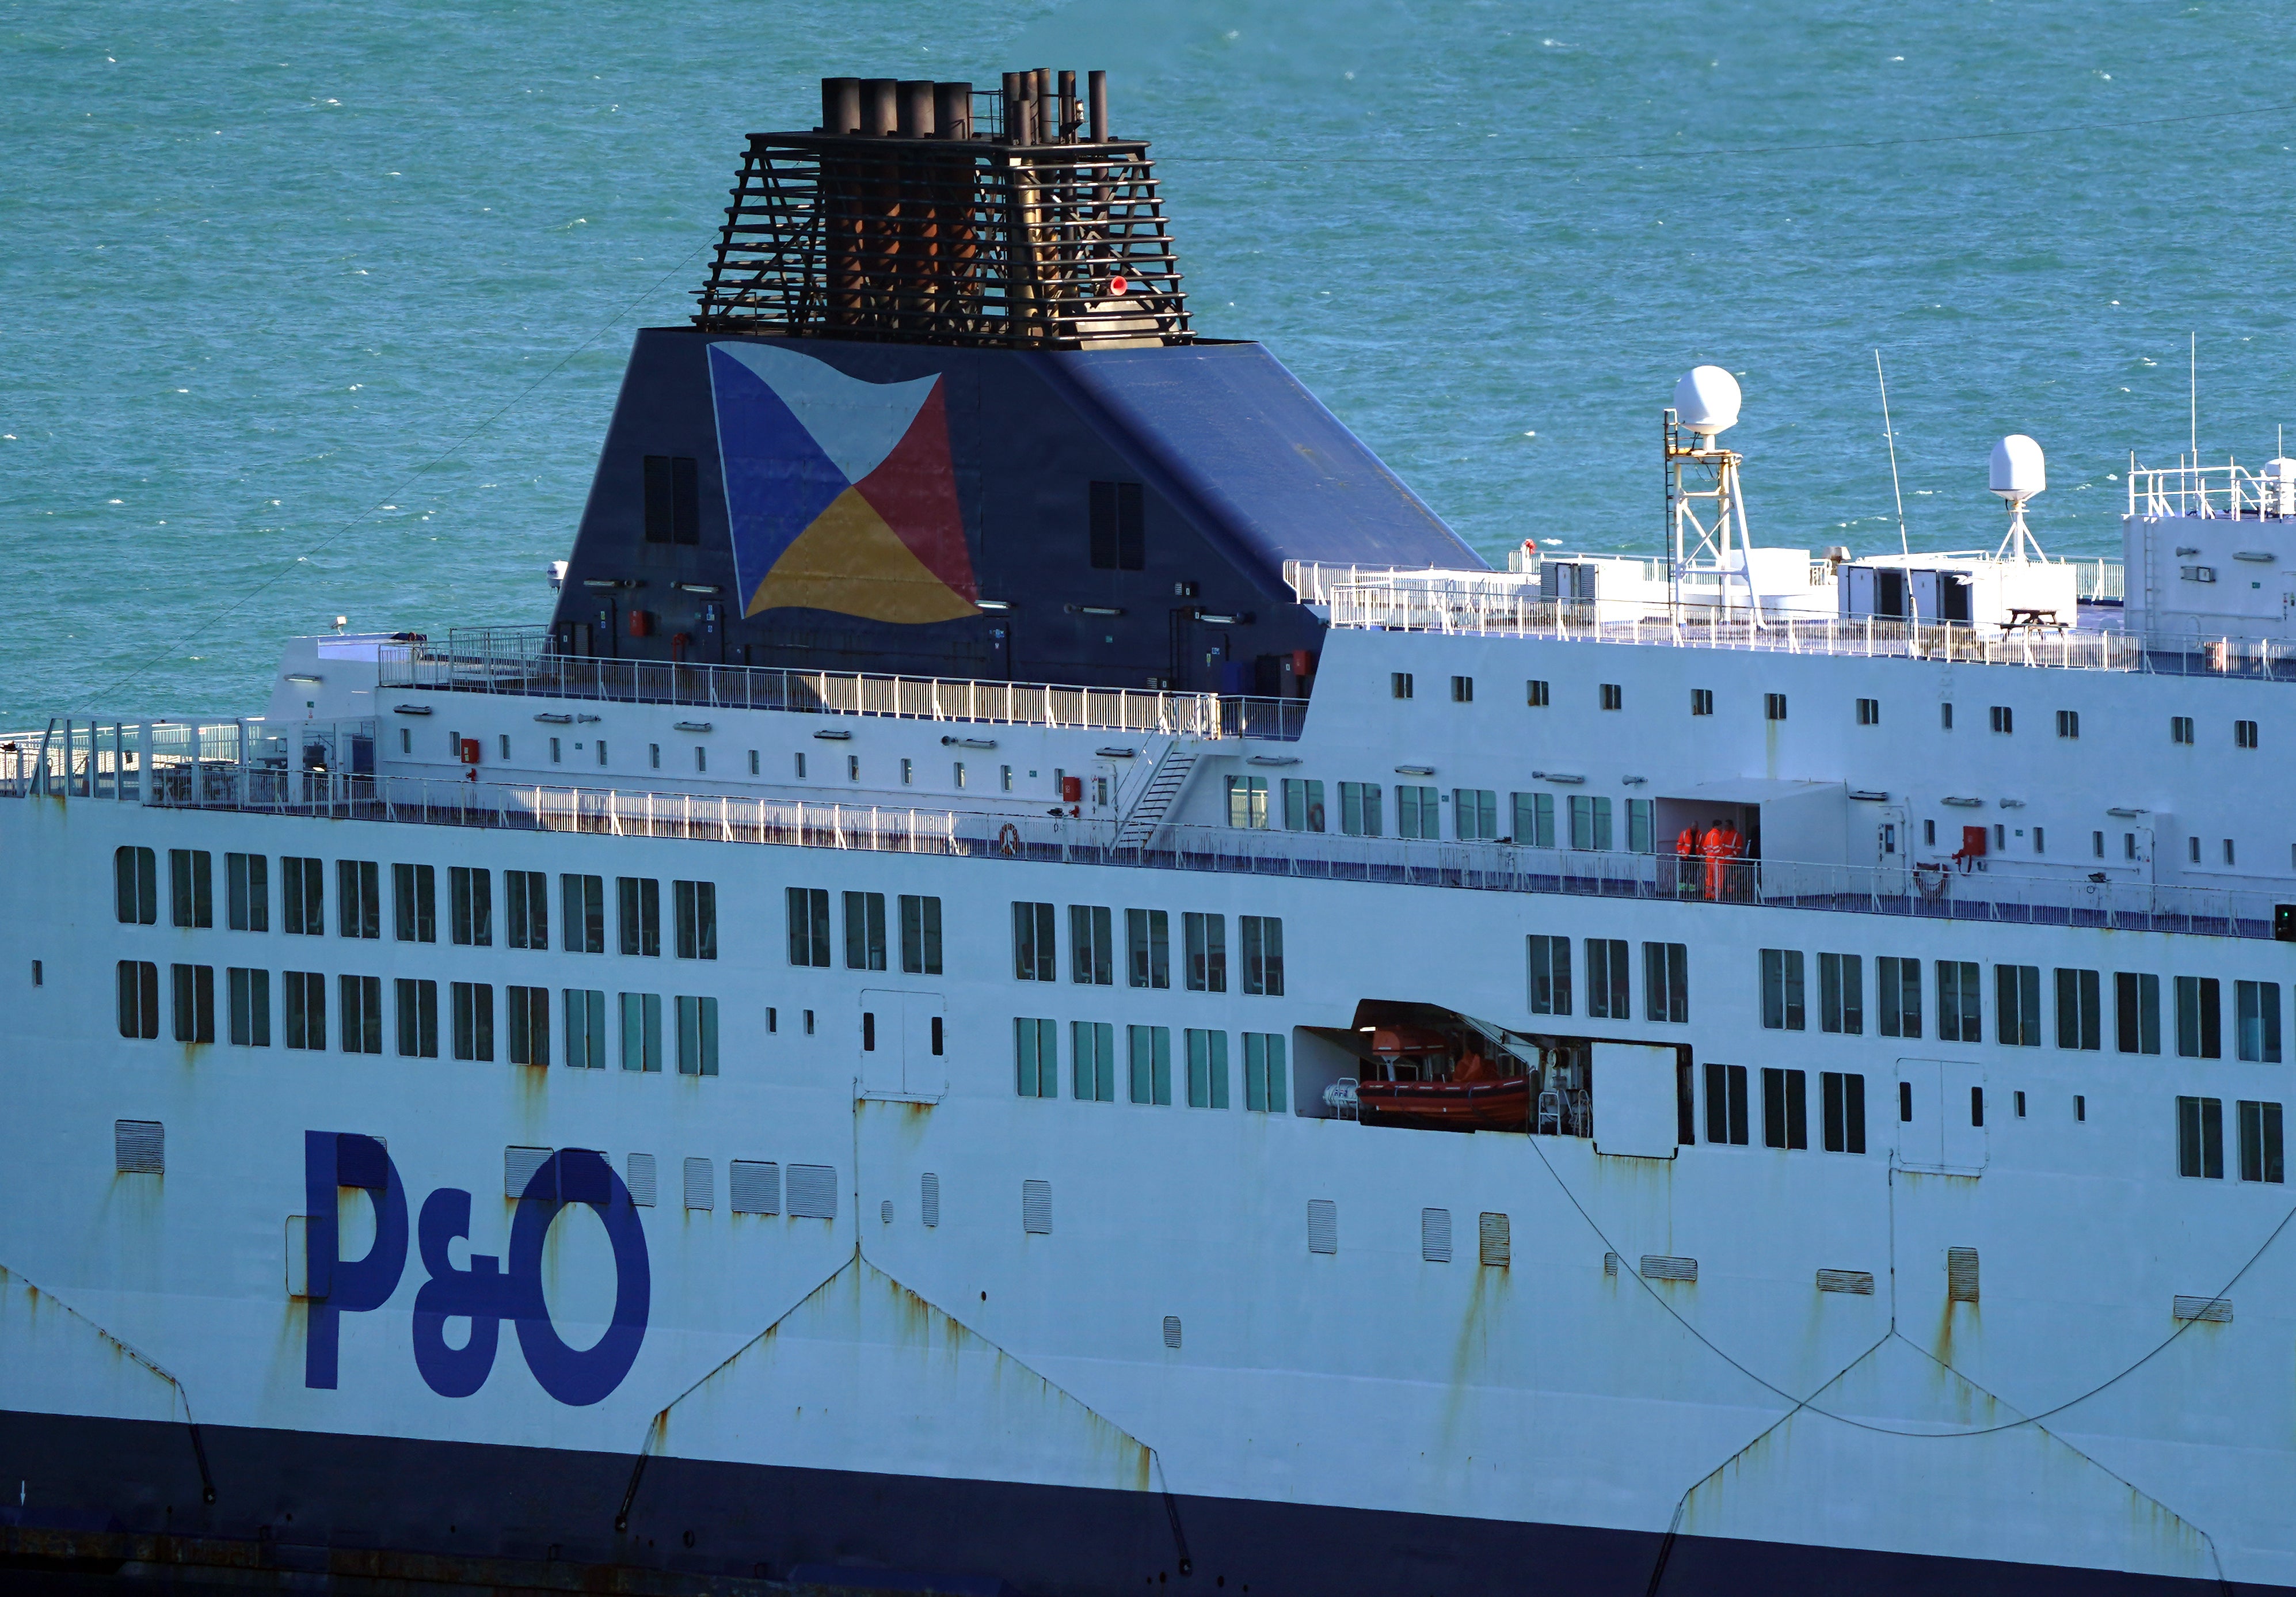 P&O said it planned to resume its services in the coming days